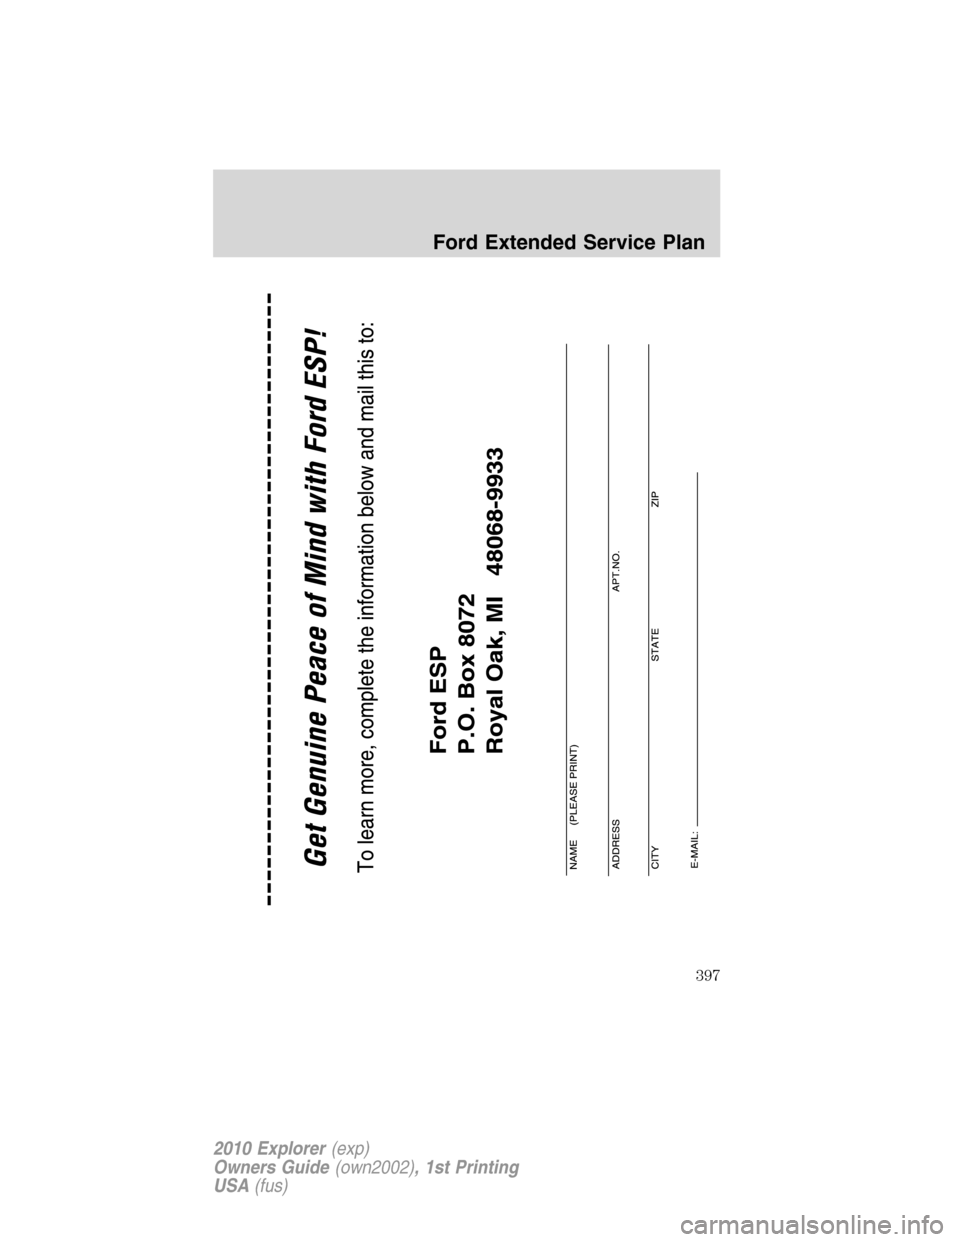 FORD EXPLORER 2010 4.G Manual PDF Ford Extended Service Plan
397
2010 Explorer(exp)
Owners Guide(own2002), 1st Printing
USA(fus) 